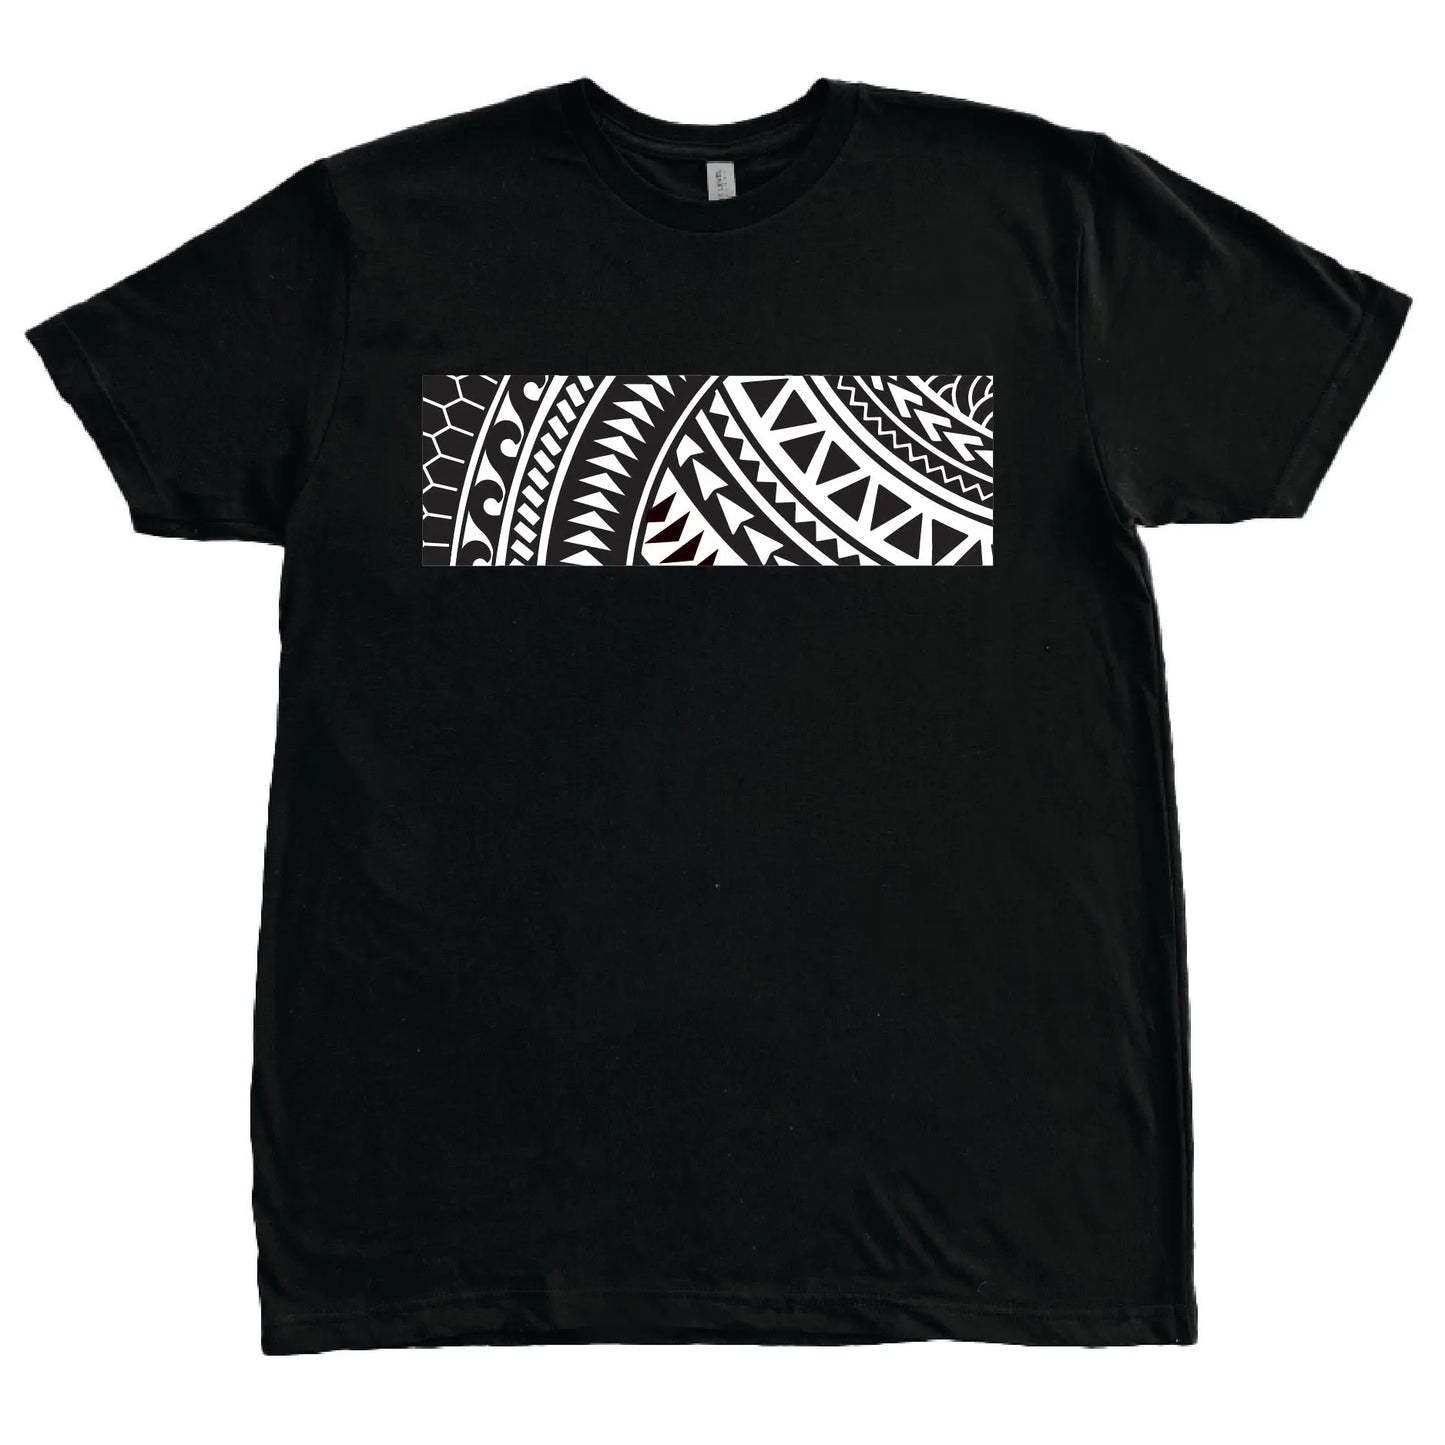 black t-shirt with Hawaiian tribal design in white. Shown on flat surface.